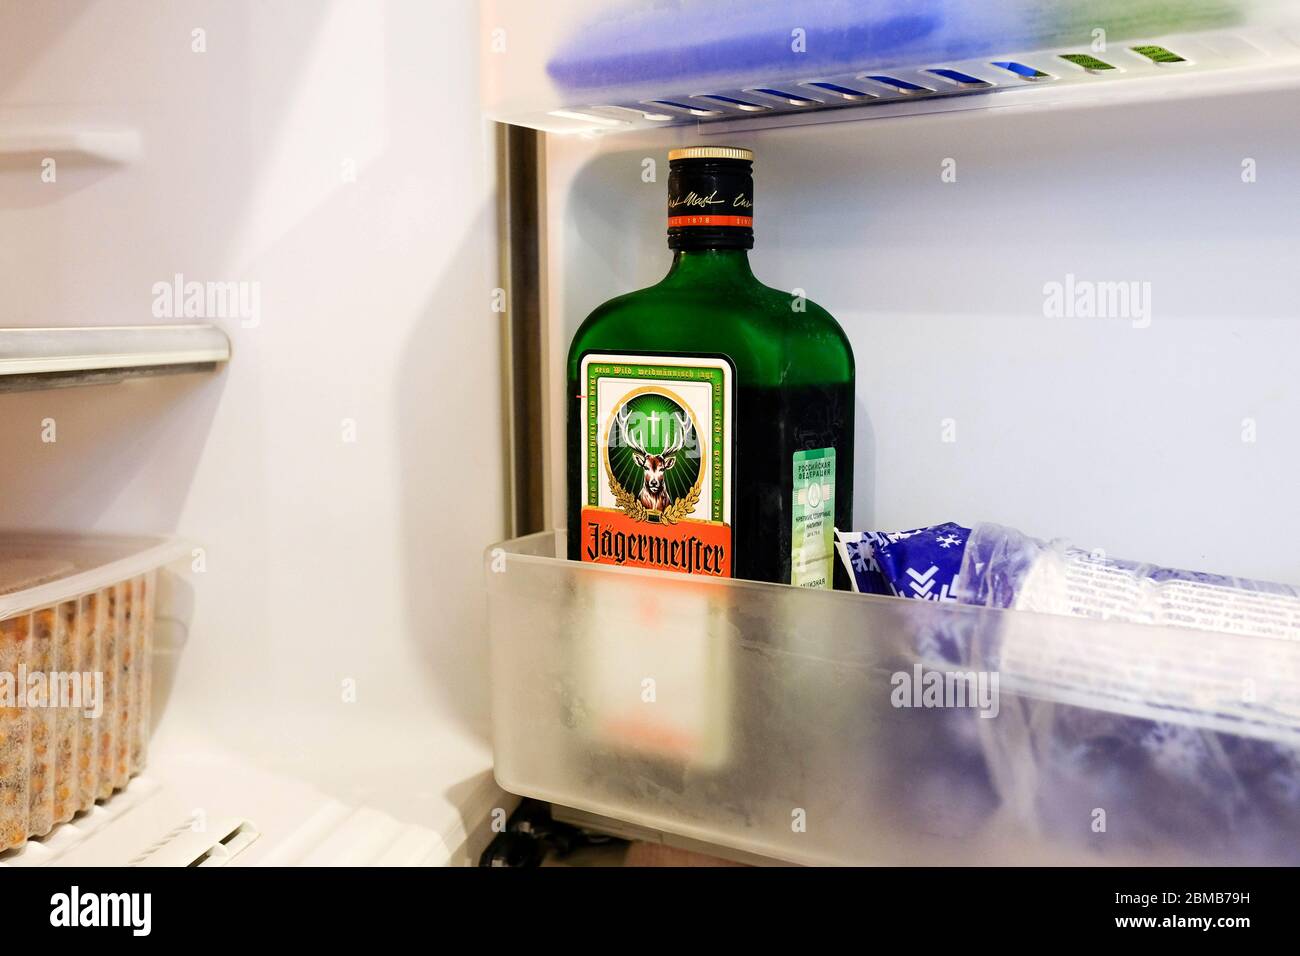 Jagermeister liquor in the freezer. Storage of a German alcoholic drink in the refrigerator at home. Stock Photo